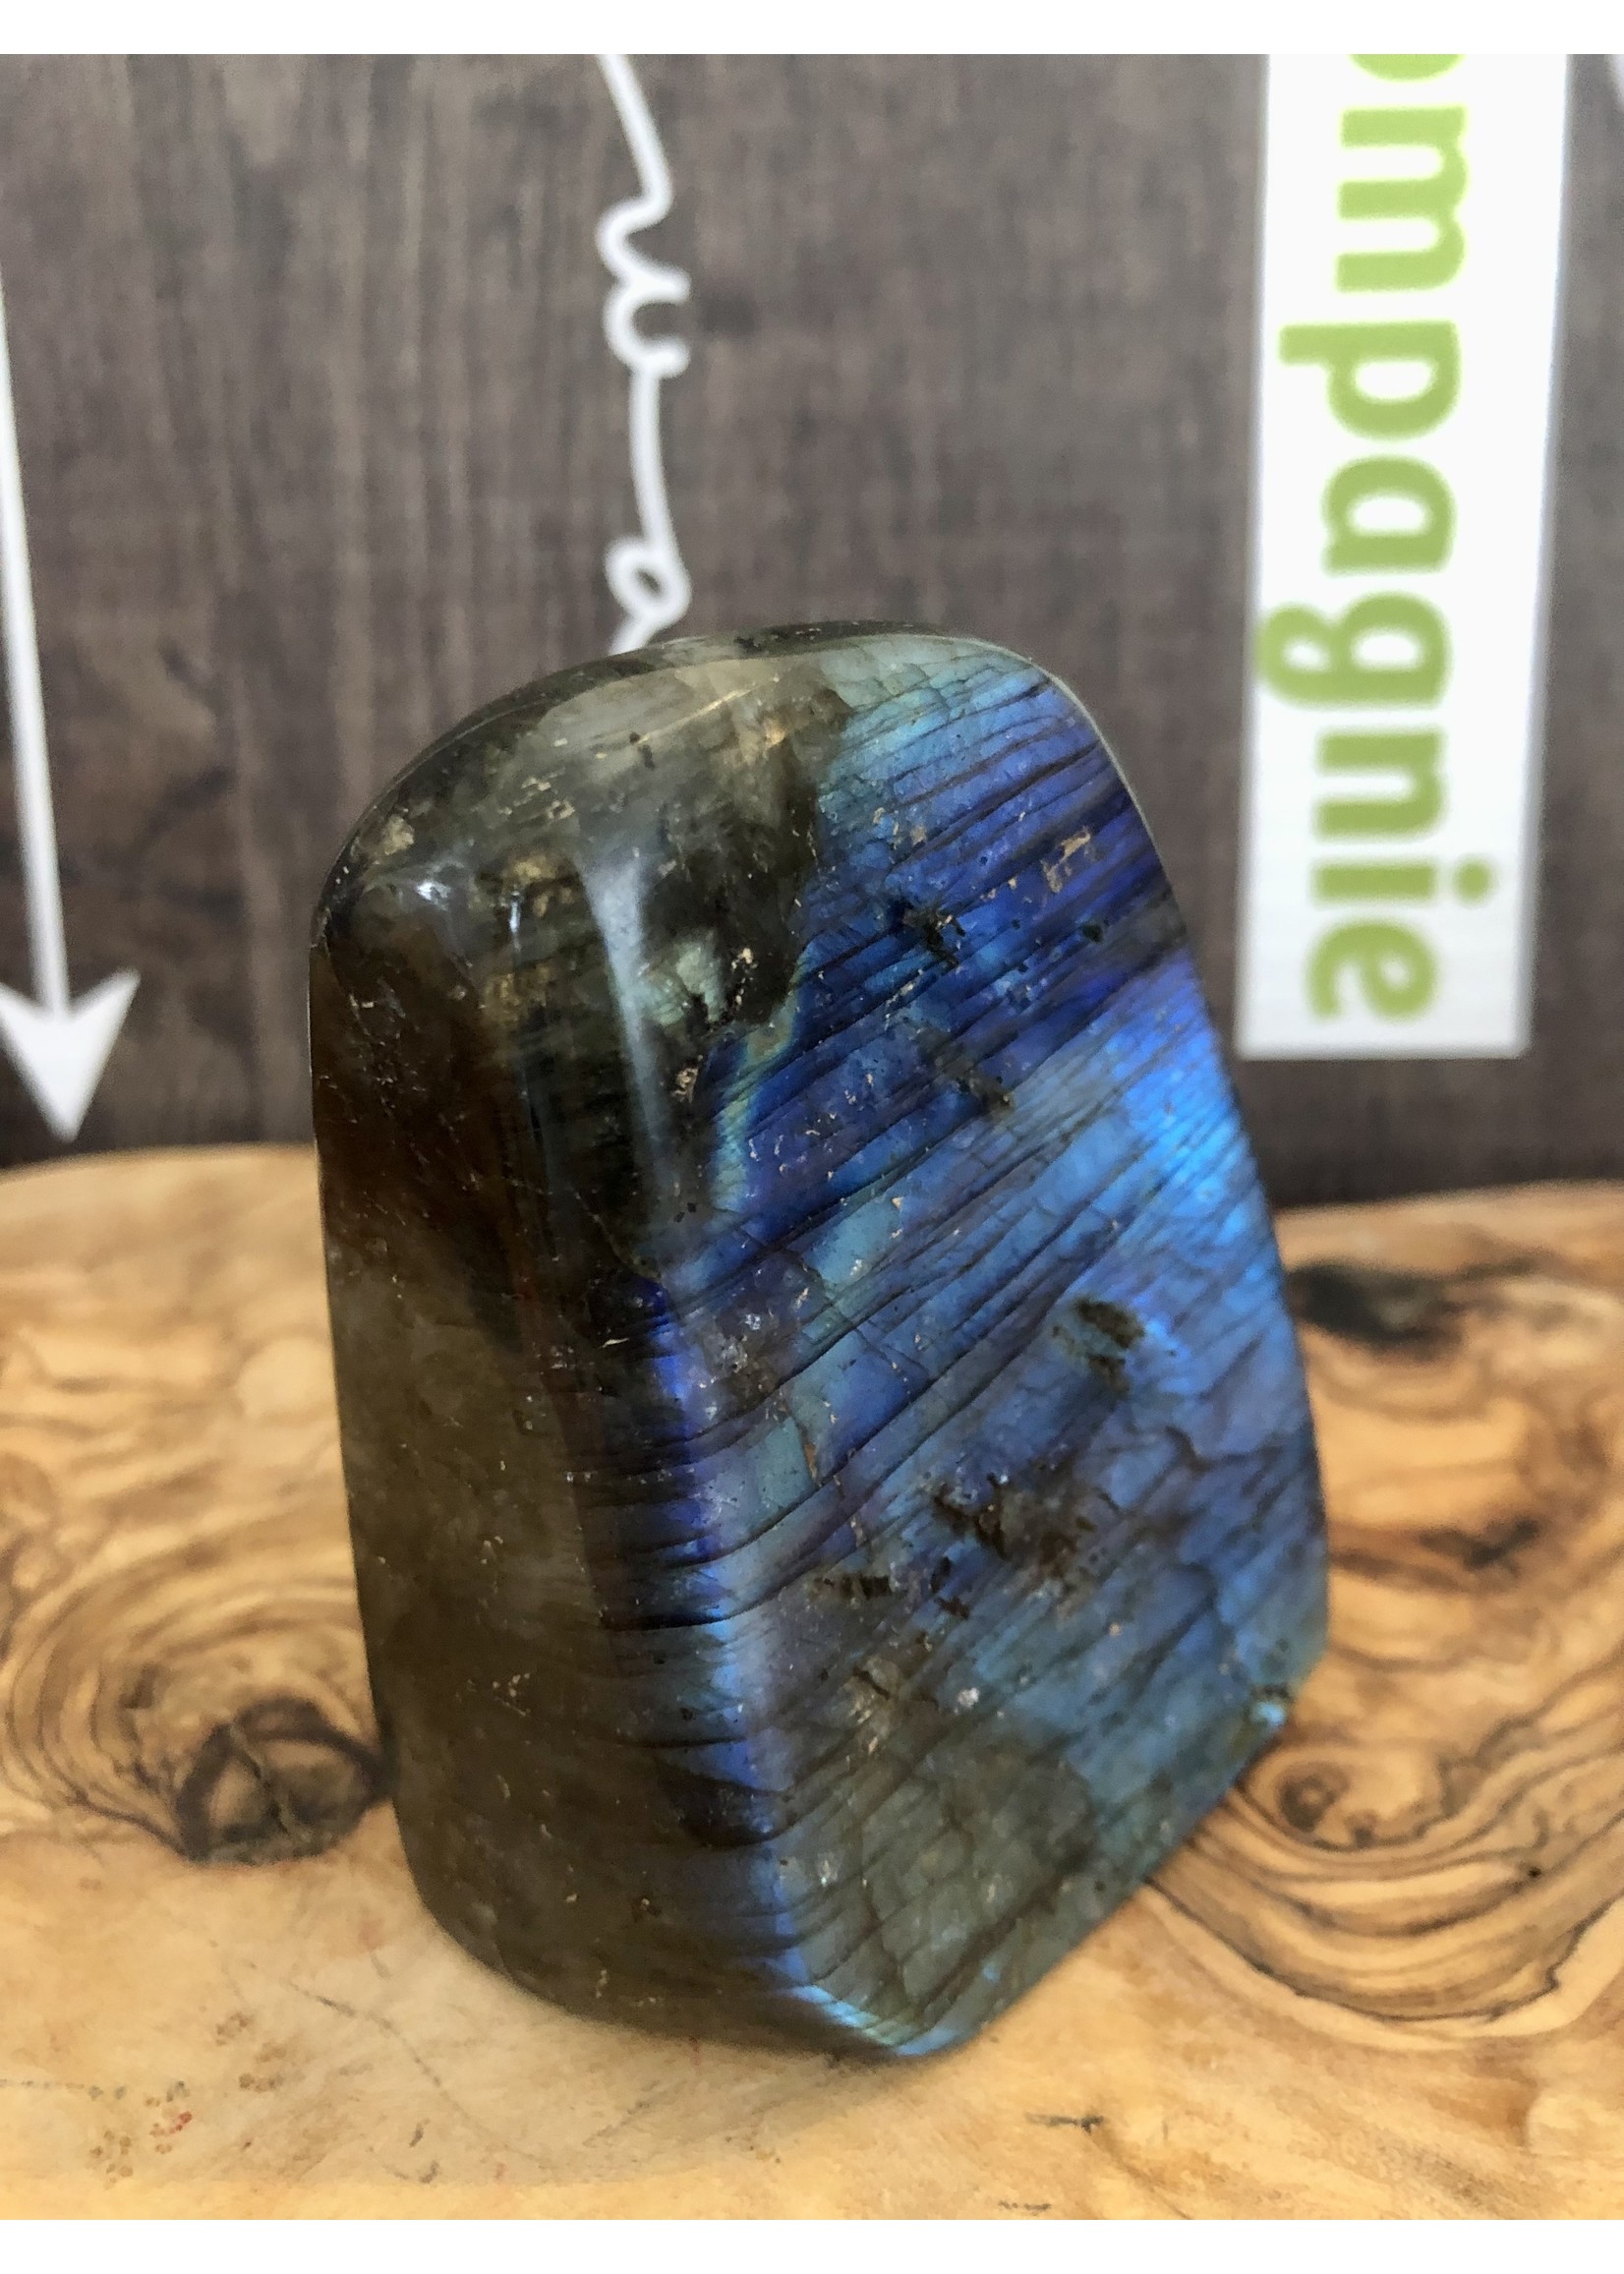 brilliant blue labradorite free form, stimulates the imagination and calms an overactive mind